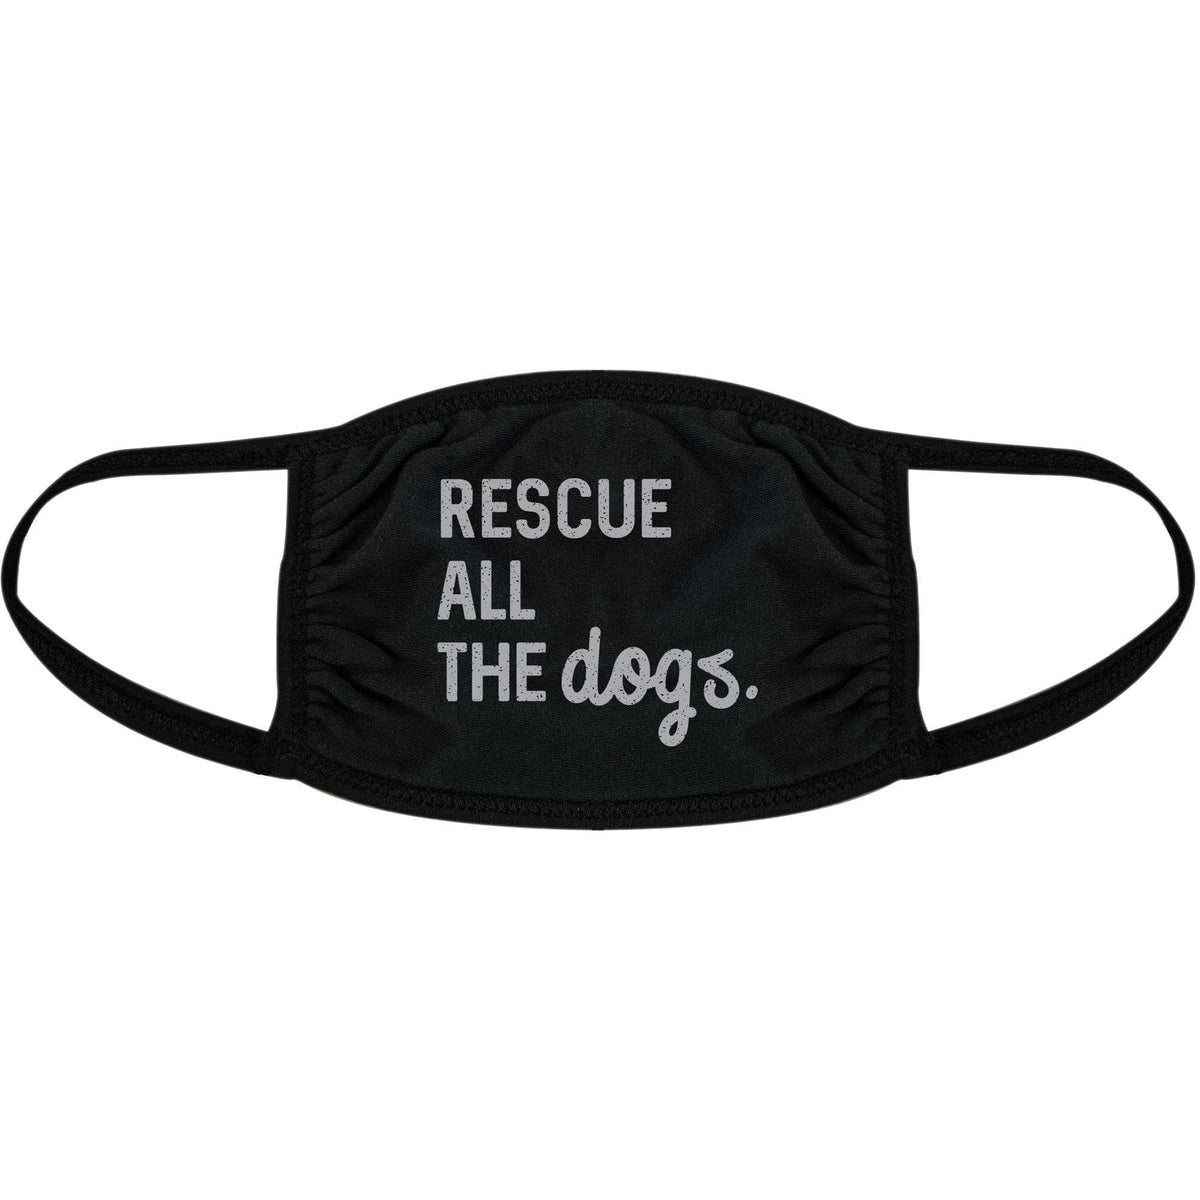 Rescue All The Dogs Face Mask Mask - Crazy Dog T-Shirts